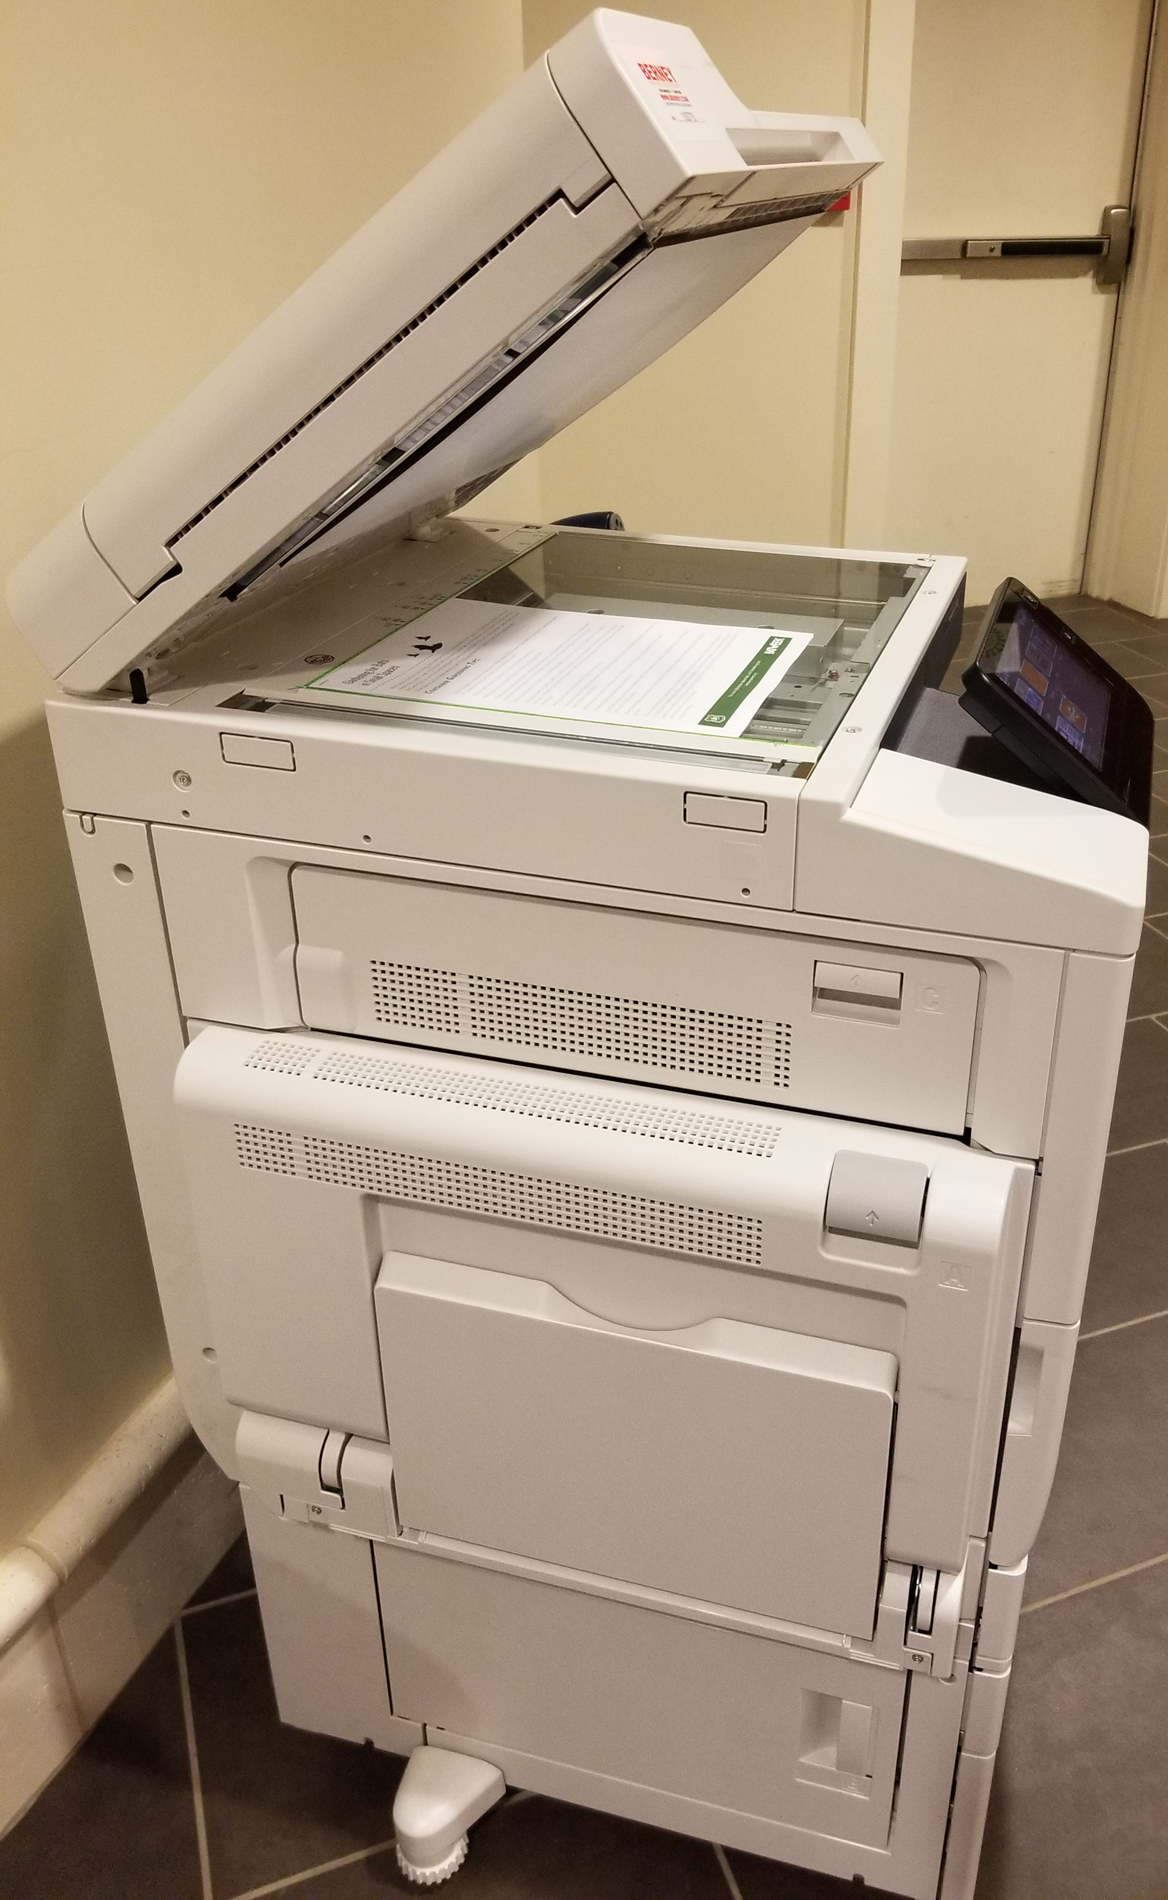 Document scanning with SFPL's Xerox printer